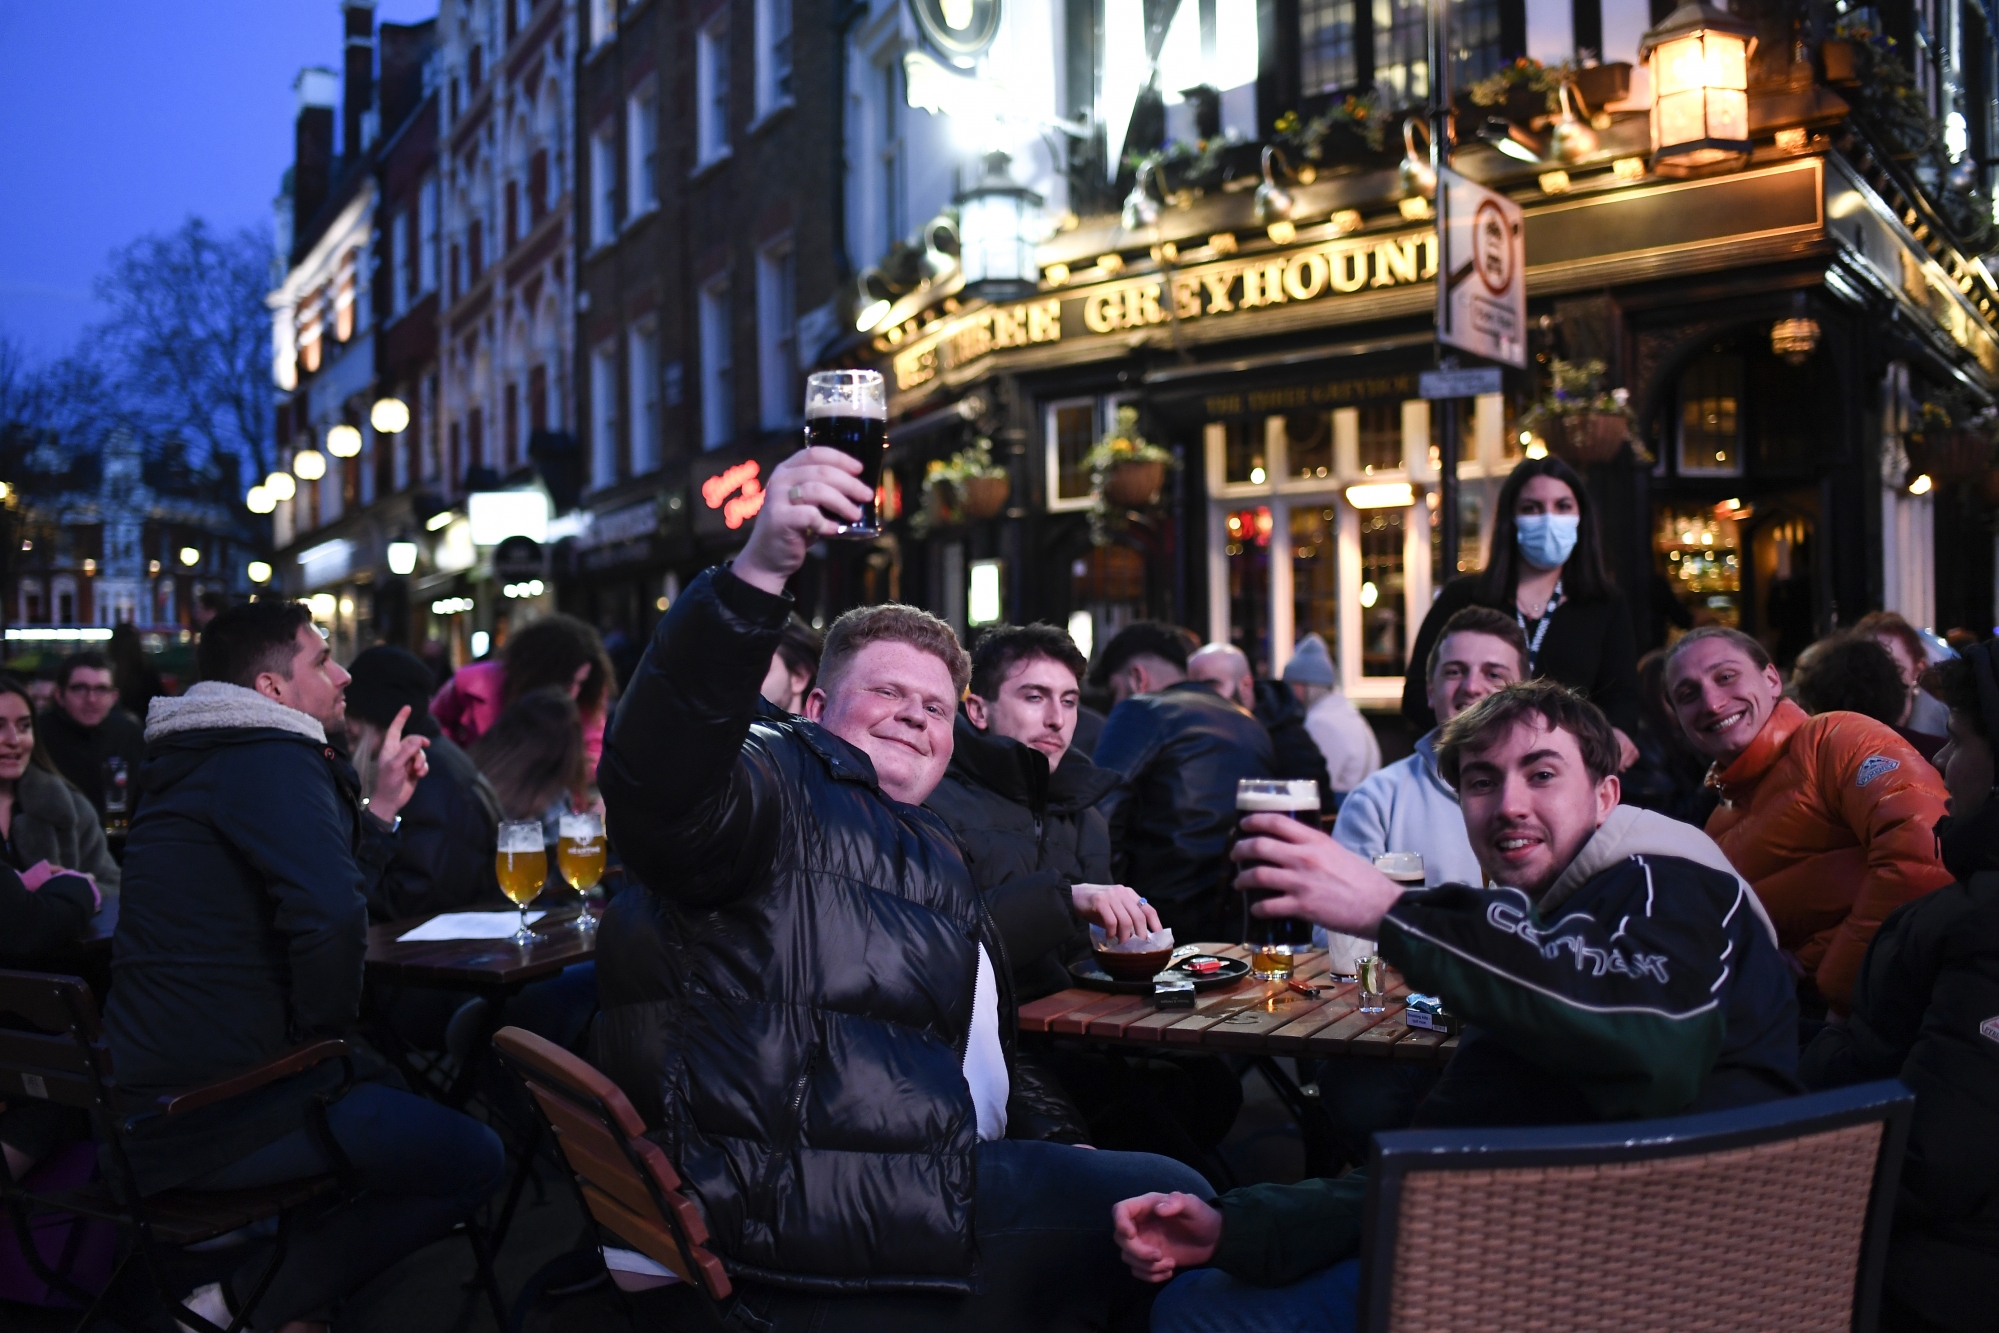 People sit at setup tables outside a pub in Soho, in London, on the day some of England's third coronavirus lockdown restrictions were eased by the British government, Monday, April 12, 2021. Pubs, shops and hairdressers have opened as lockdown restrictions are eased Monday. (AP Photo/Alberto Pezzali)